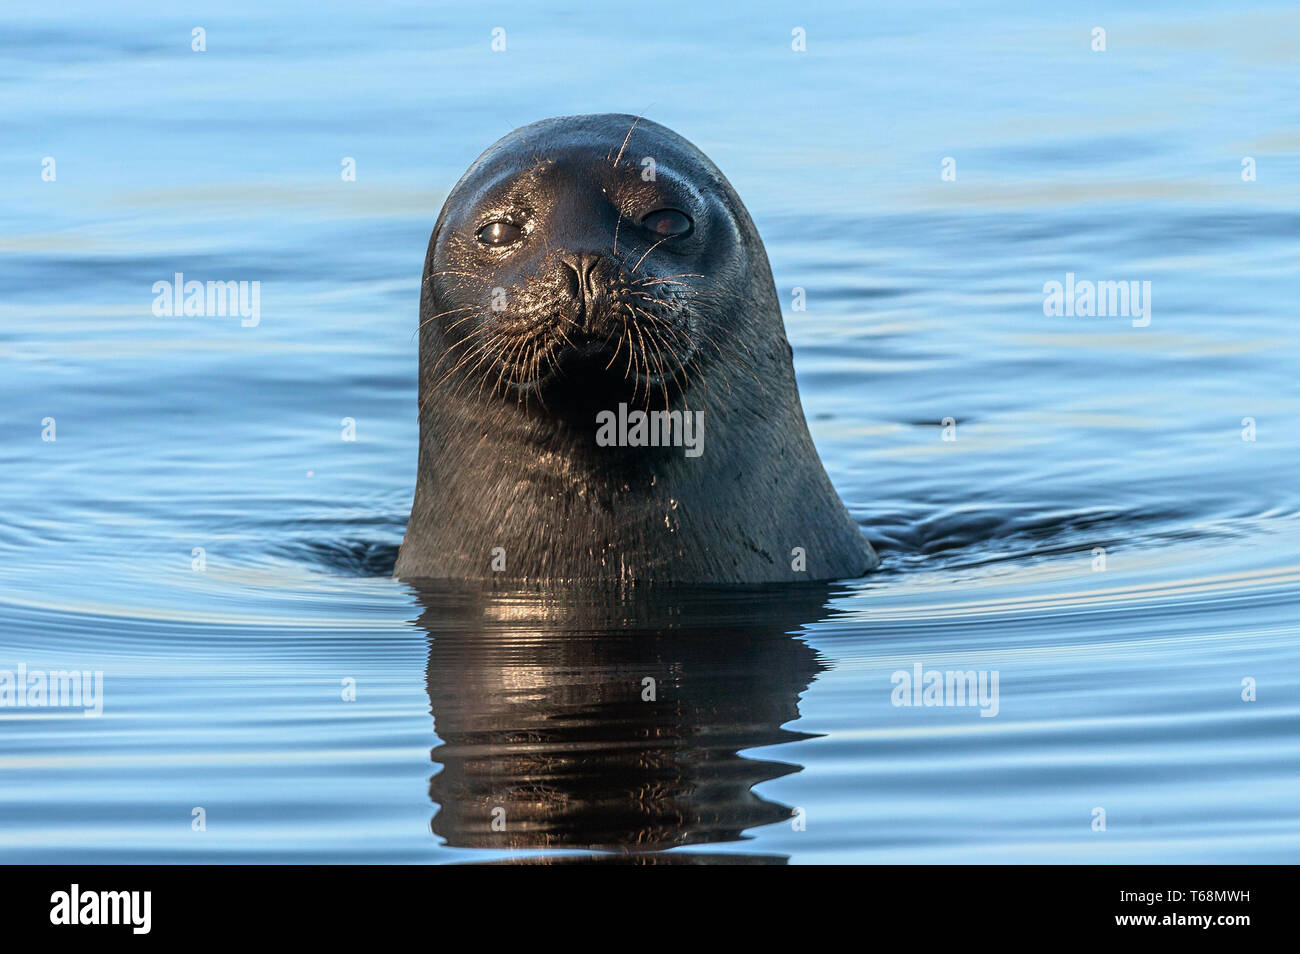 The Ladoga ringed seal swimming in the water. Front view. Blue water background.  Scientific name: Pusa hispida ladogensis. The Ladoga seal in a natur Stock Photo